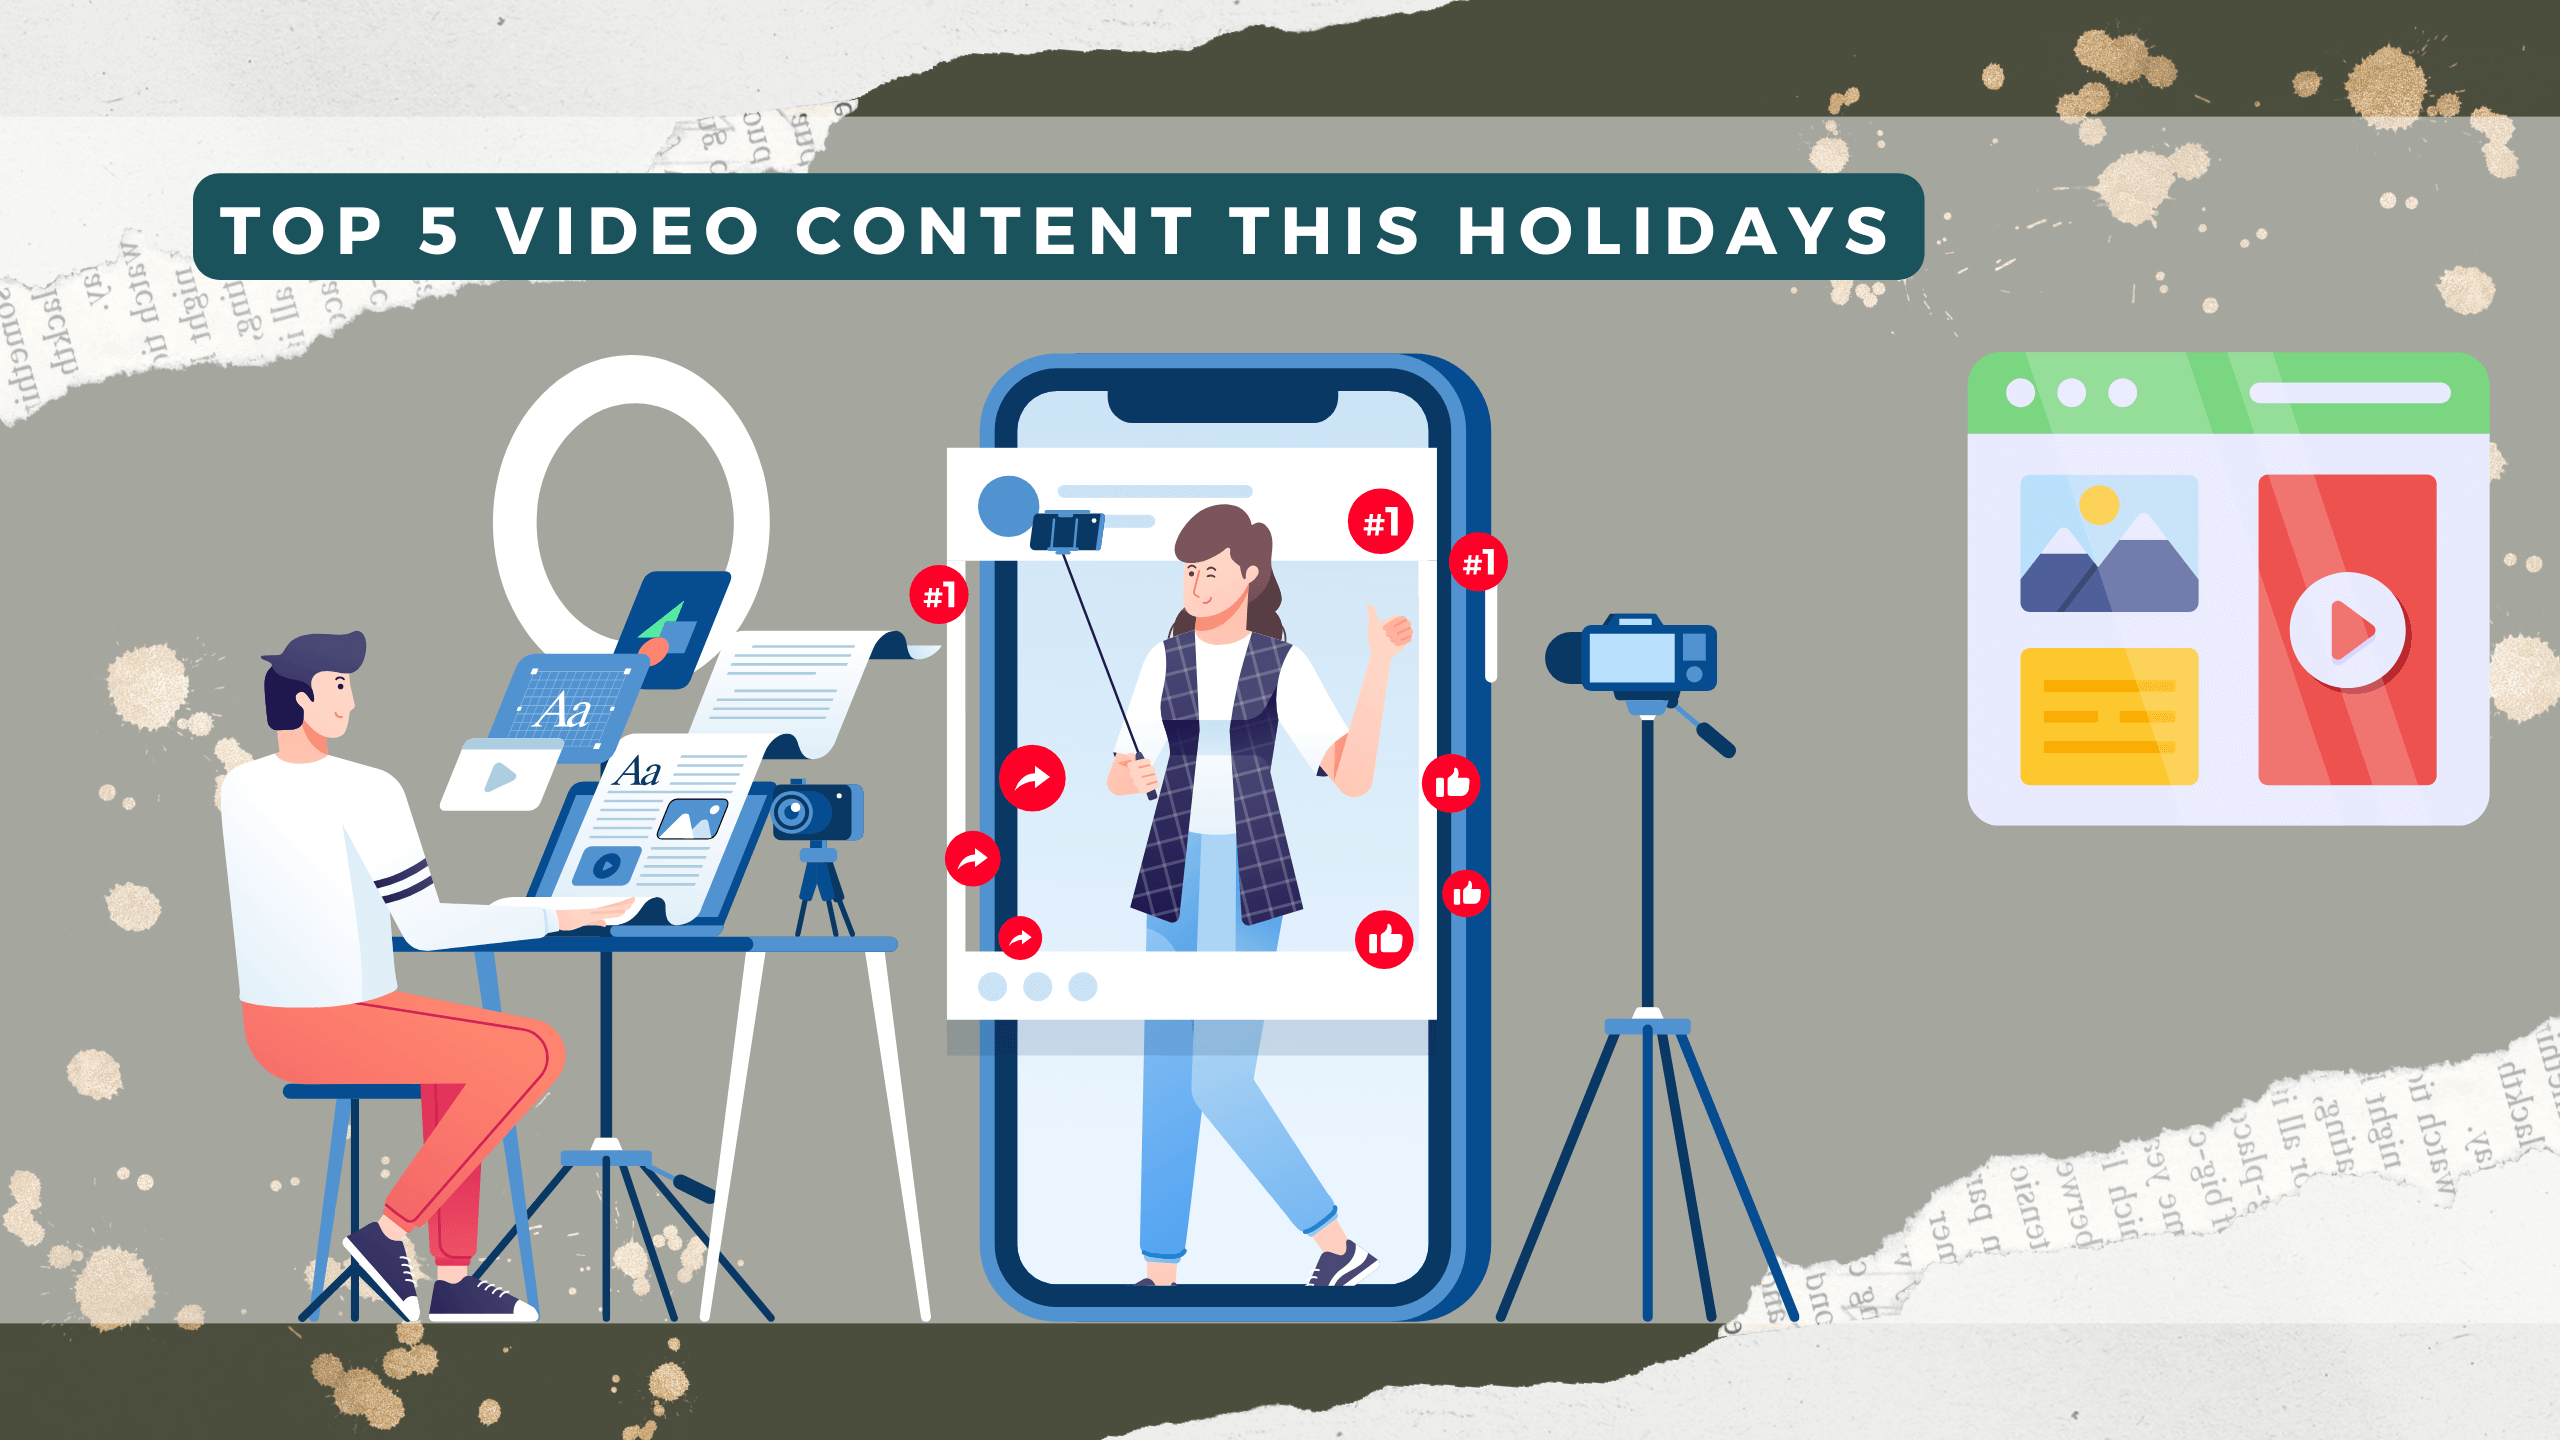 Top 5 video contents this holidays